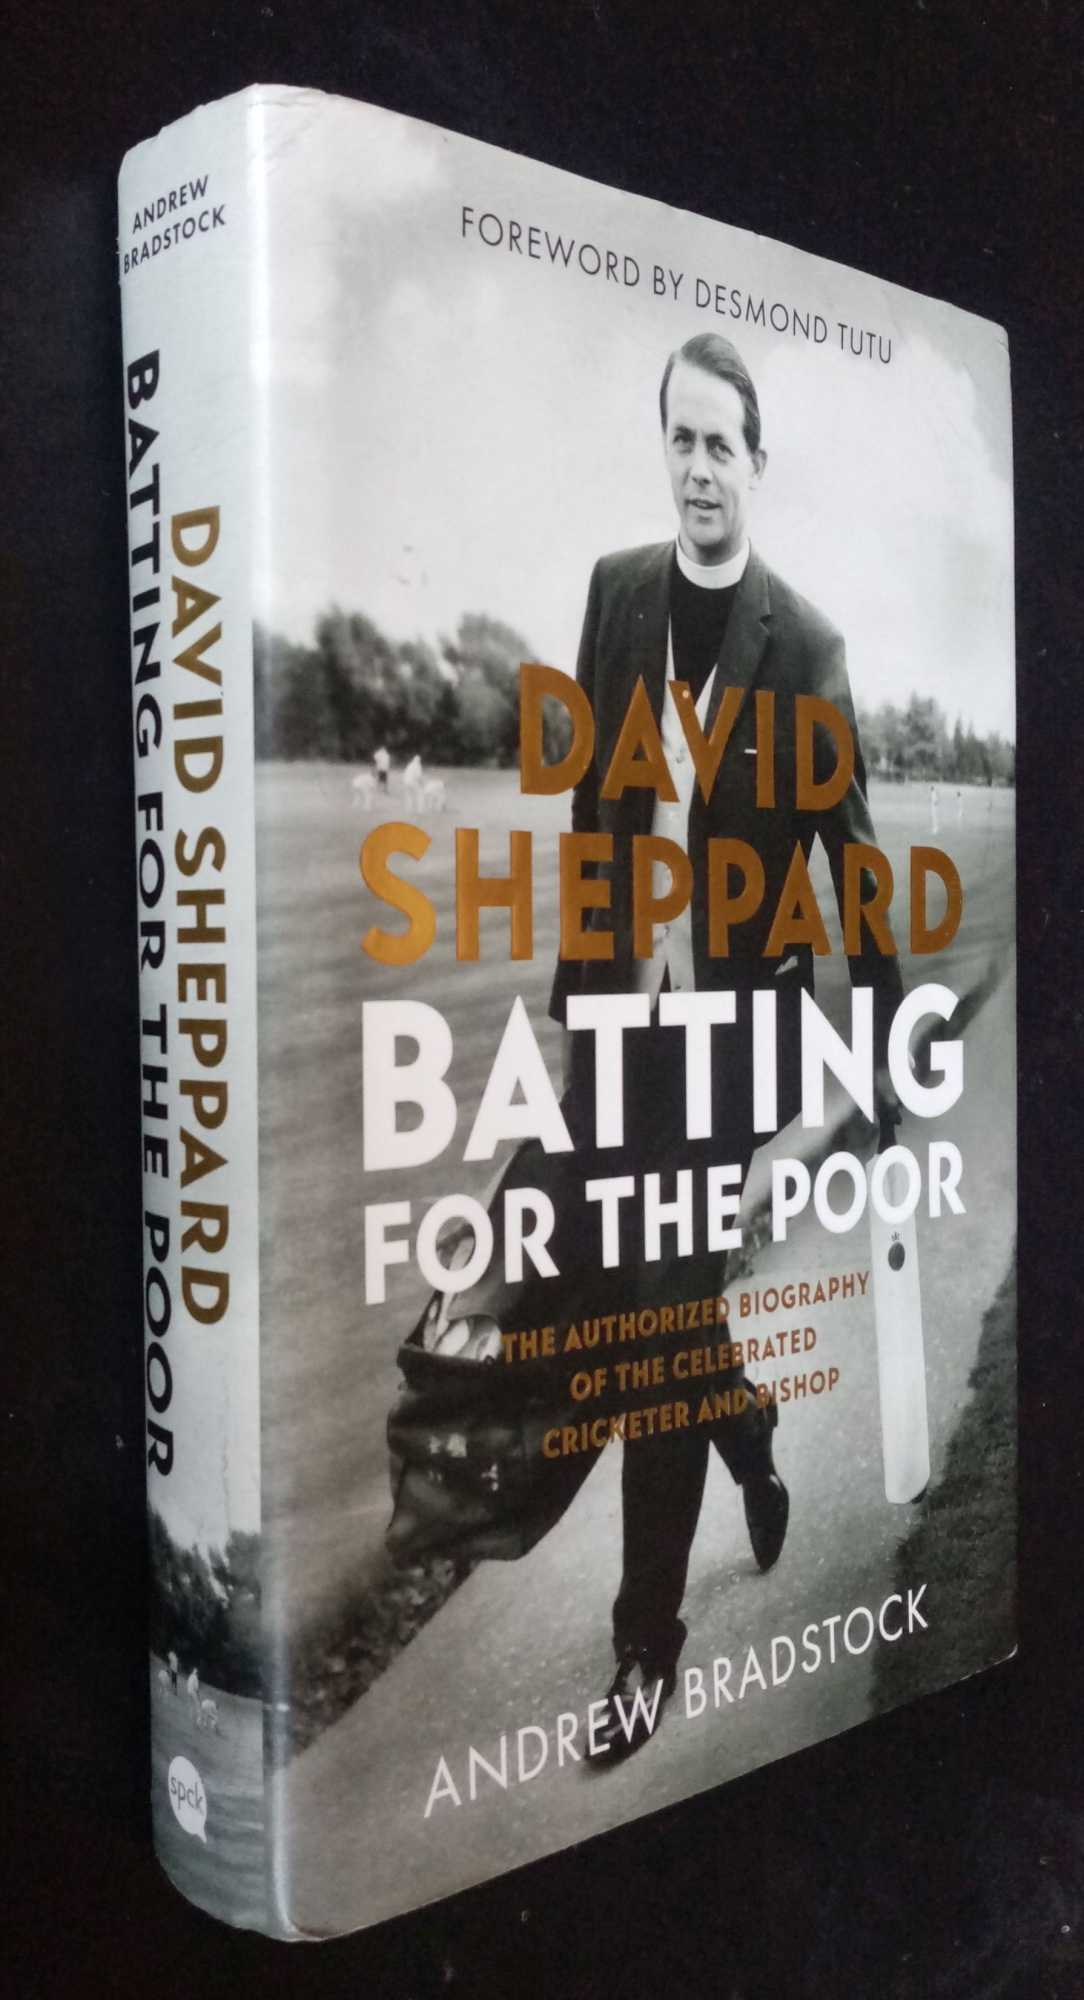 Andrew Bradstock - David Sheppard: Batting for the Poor: The authorized biography of the celebrated cricketer and bishop   SIGNED/Inscribed